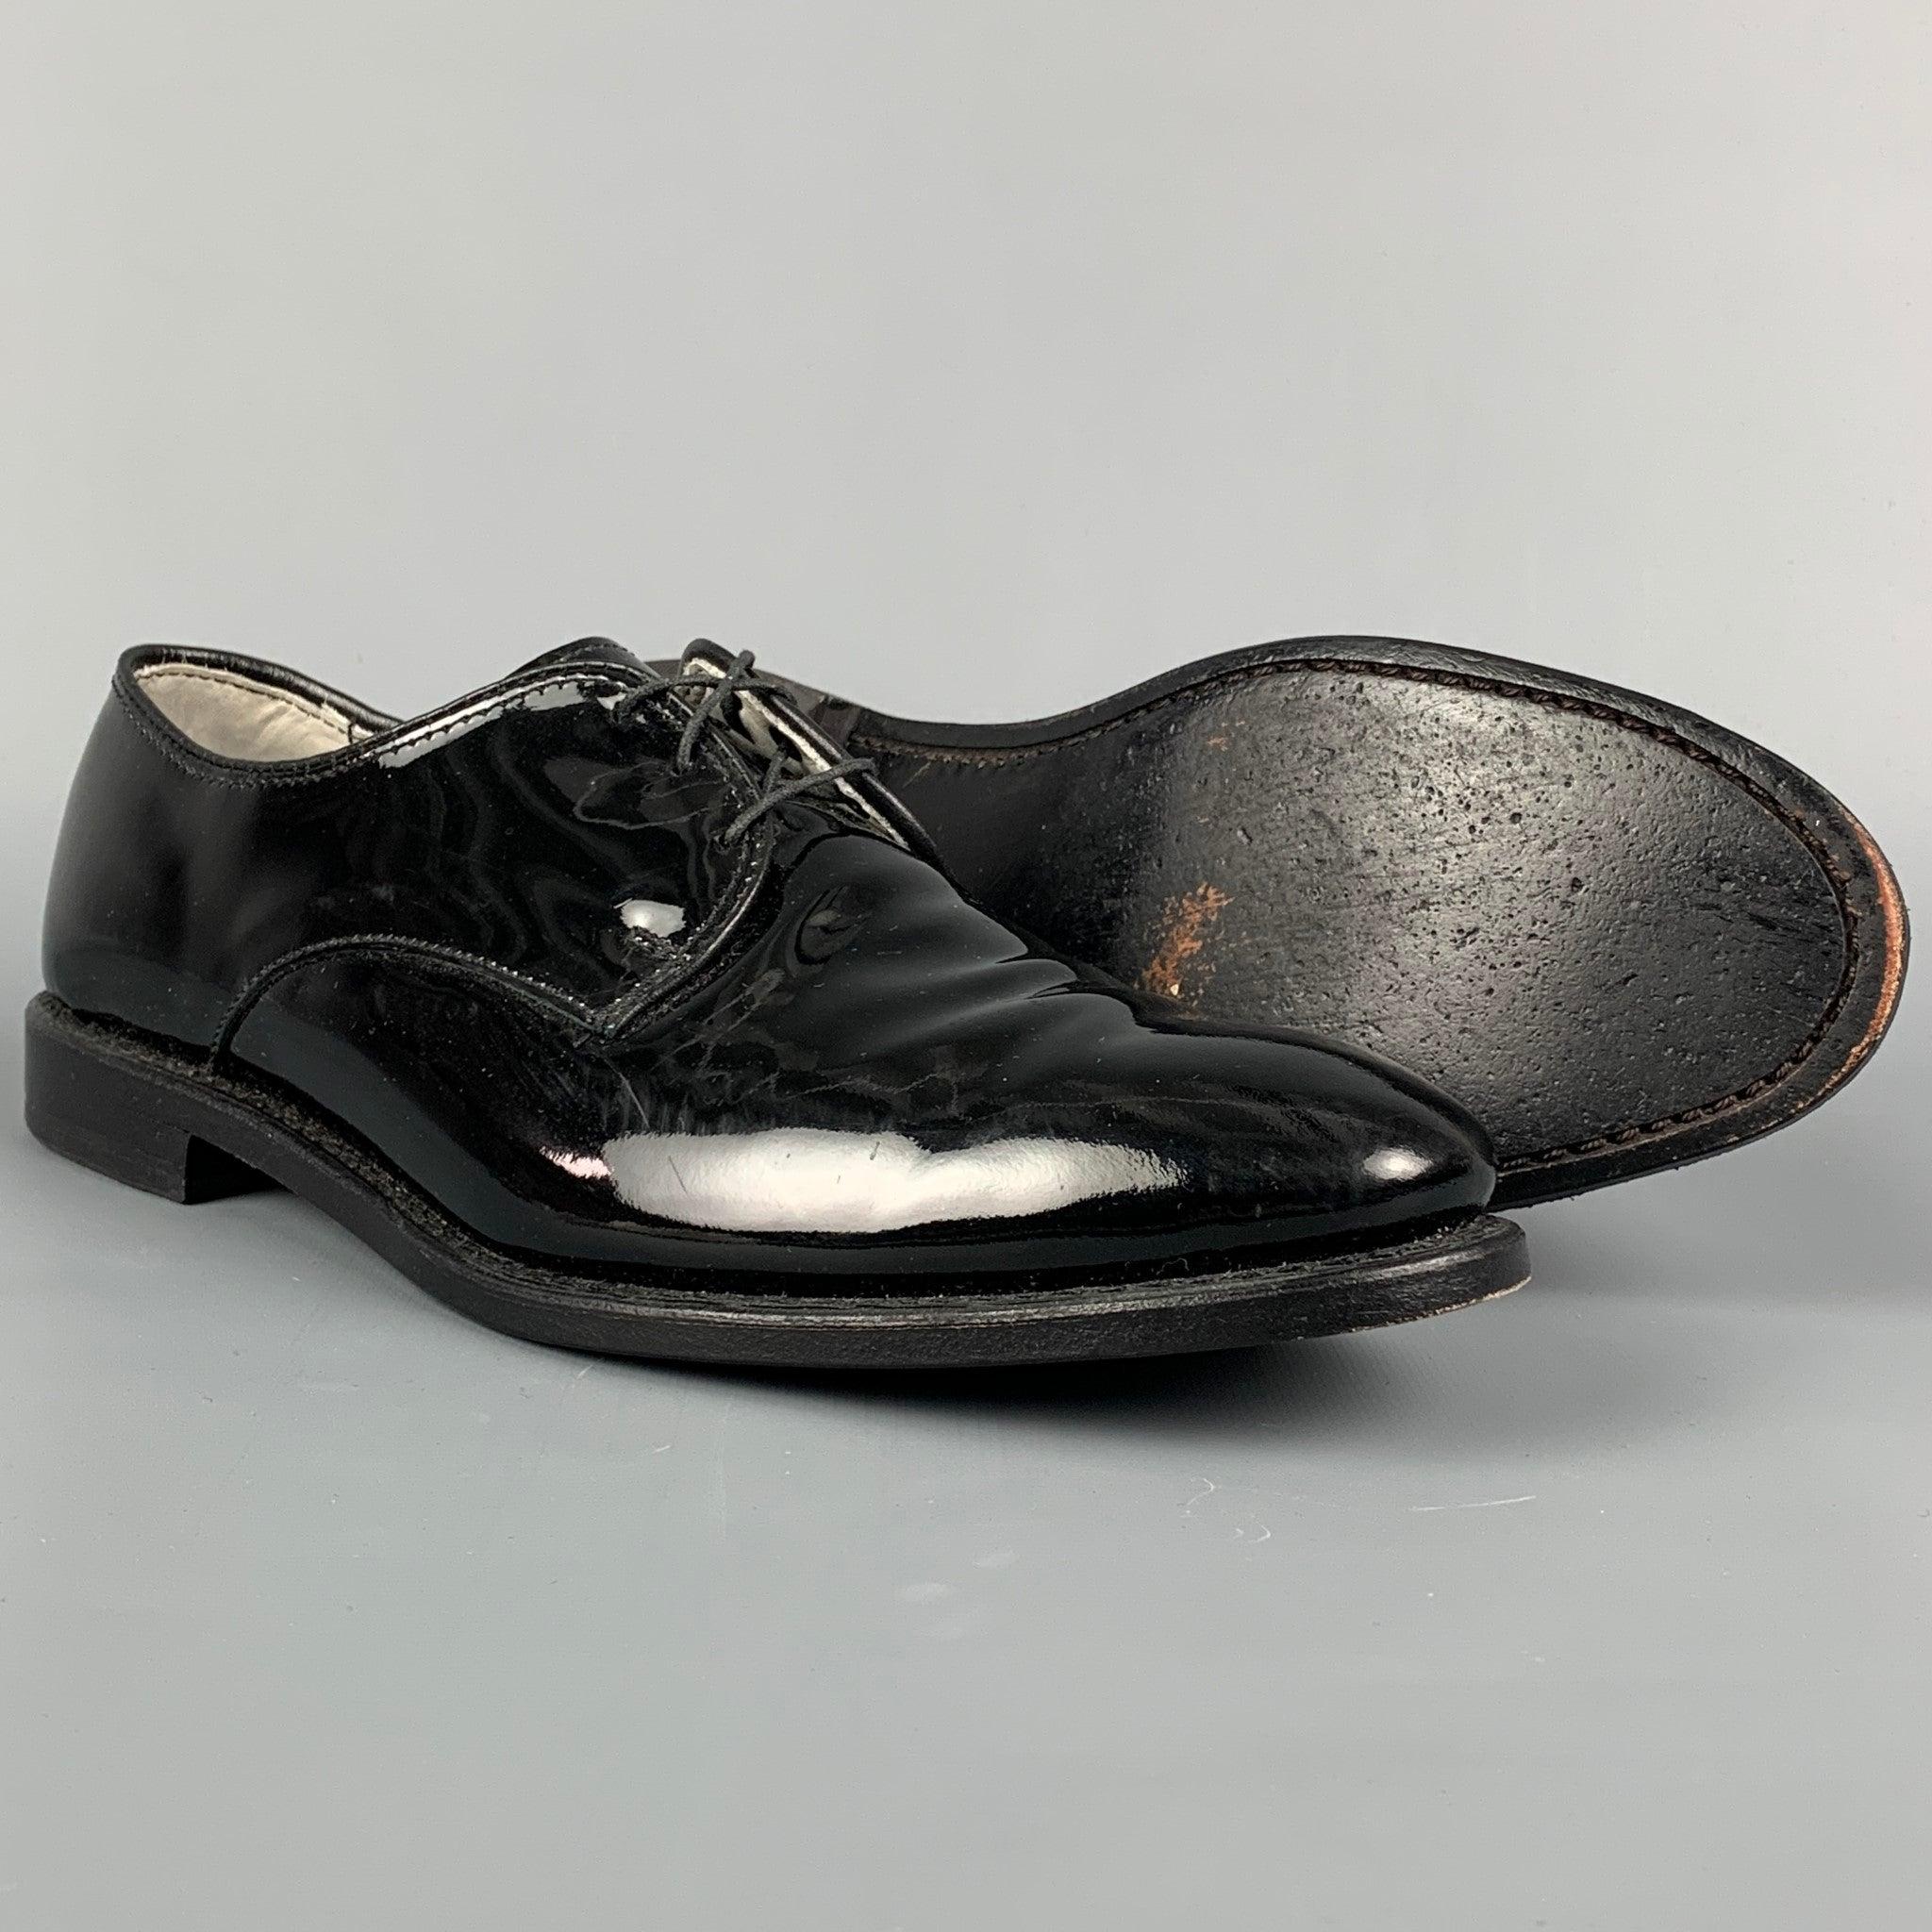 ALLEN EDMONDS Mayfair Size 9 Black Leather Lace Up Shoes In Good Condition For Sale In San Francisco, CA